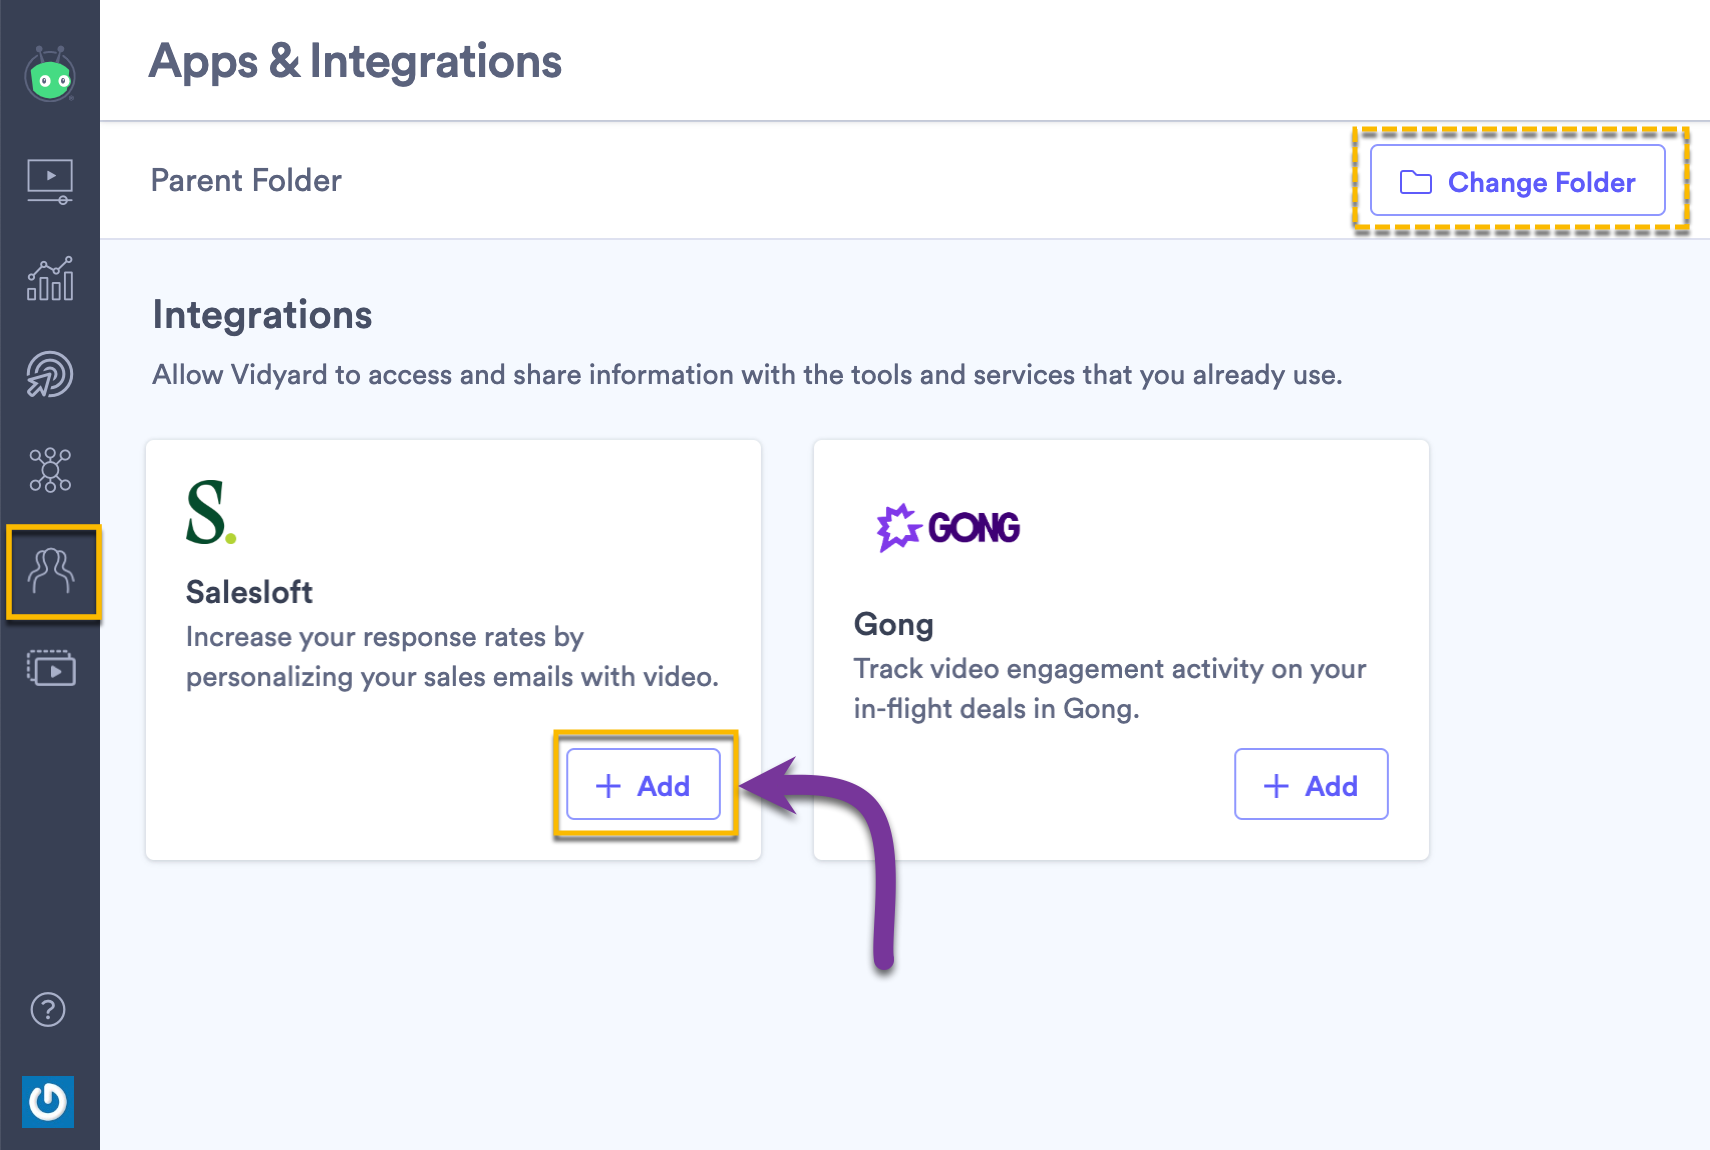 Selecting the Add button next to Salesloft to set up the integration